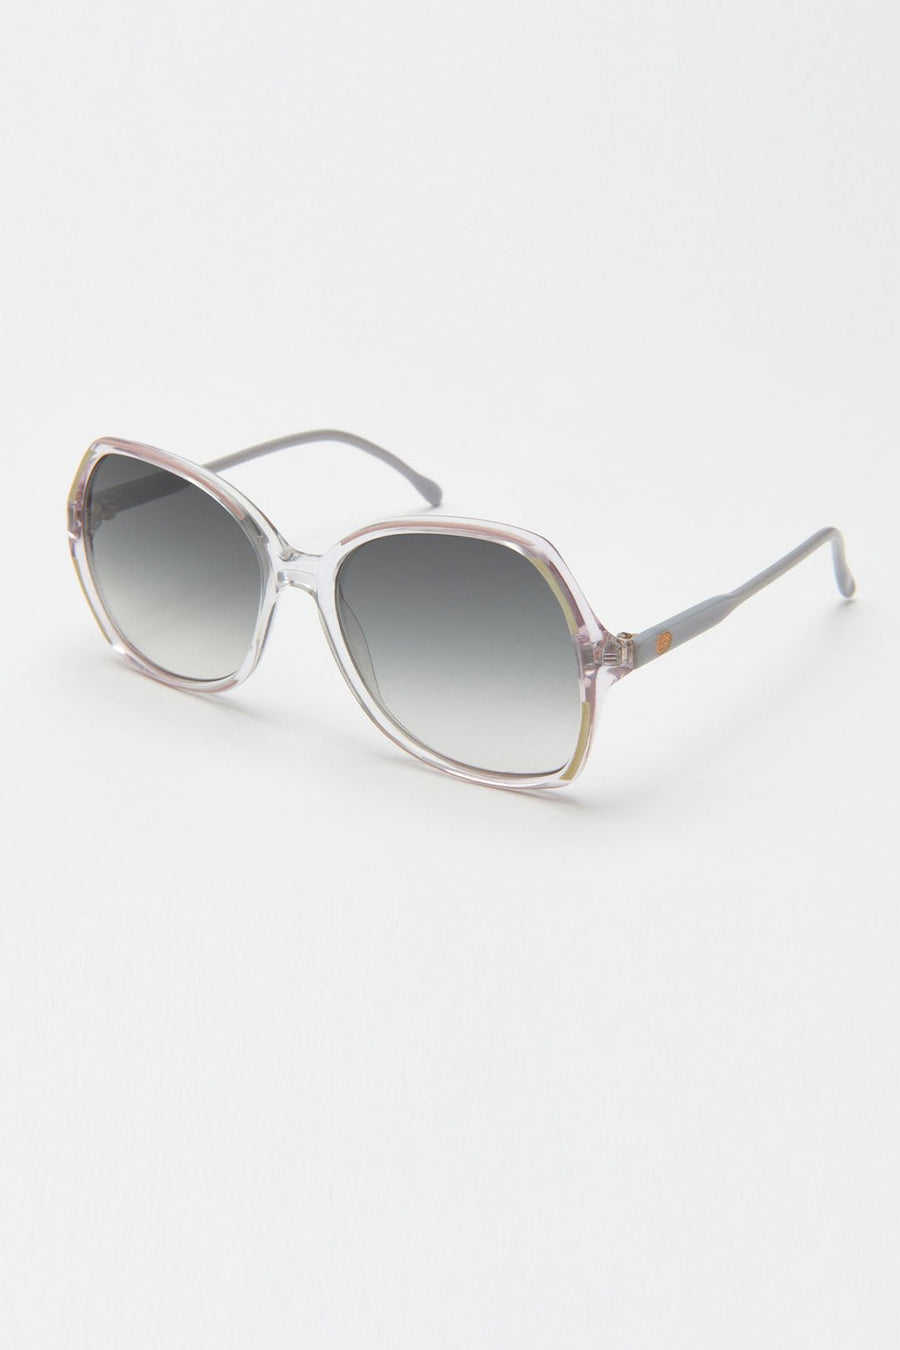 VINTAGE OVERSIZED GUCCI SUNGLASSES, TAUPE - Burning Torch Online Boutique